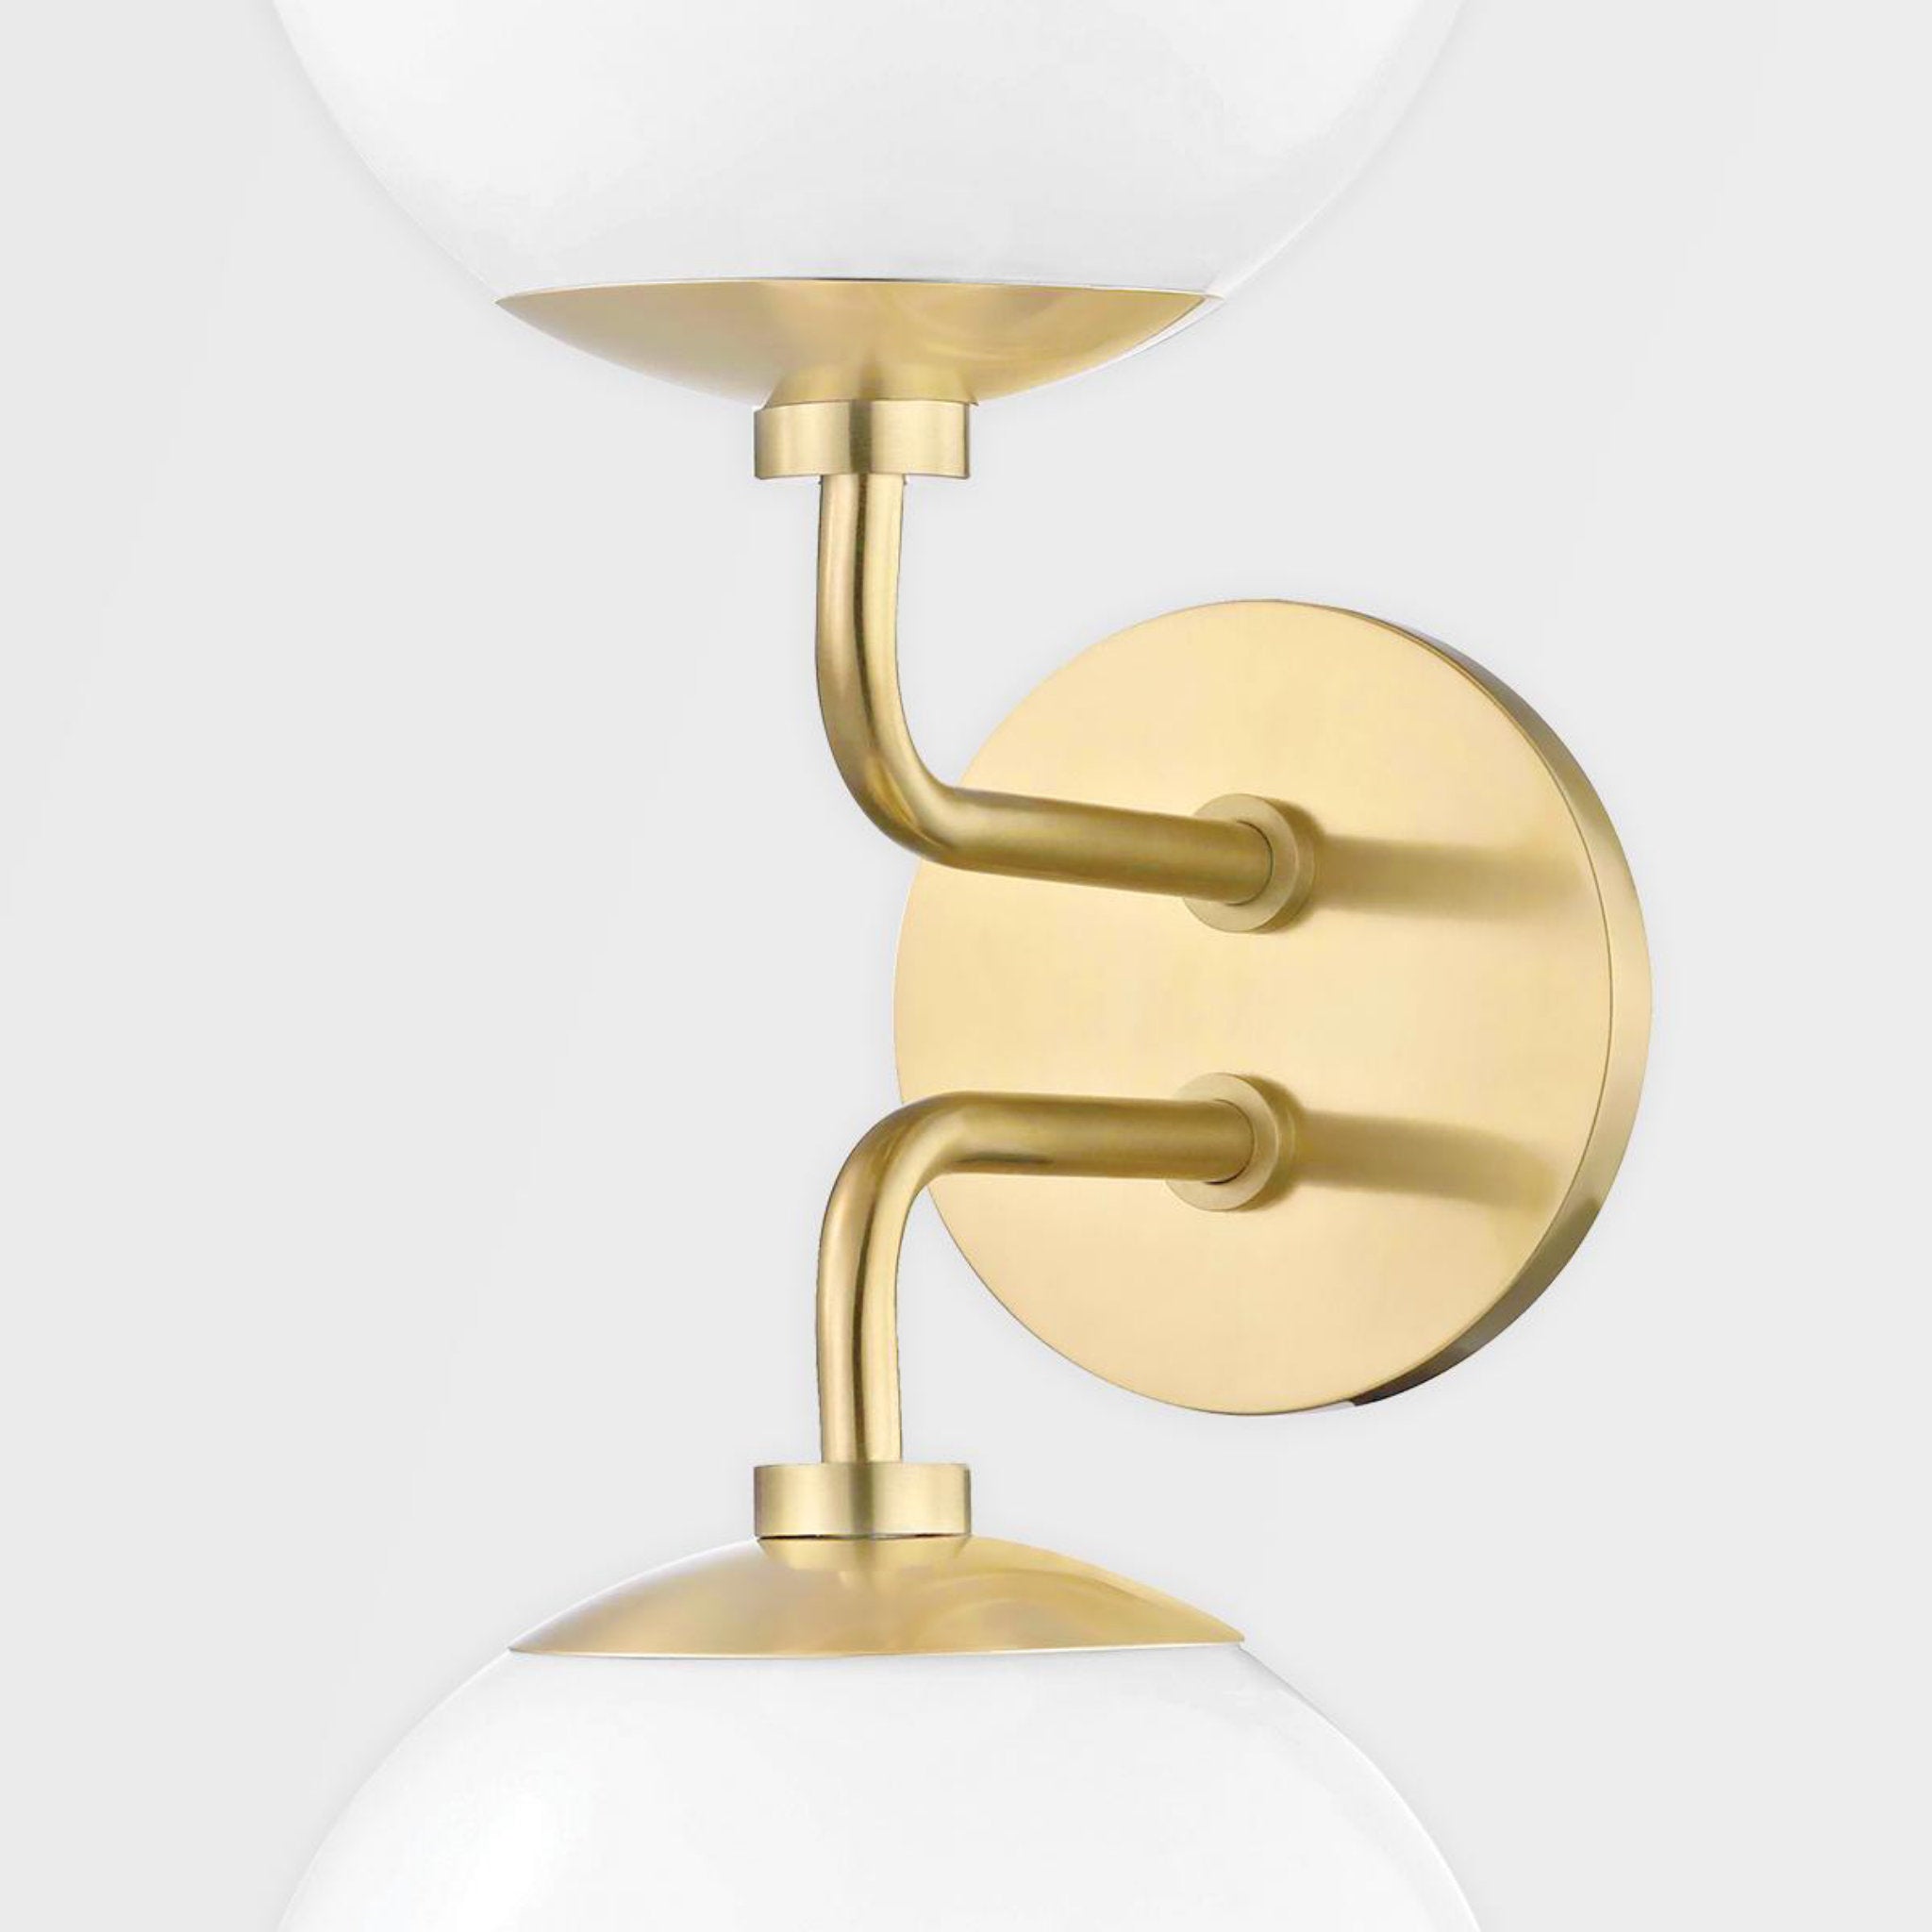 Stella 1-Light Wall Sconce in Polished Nickel